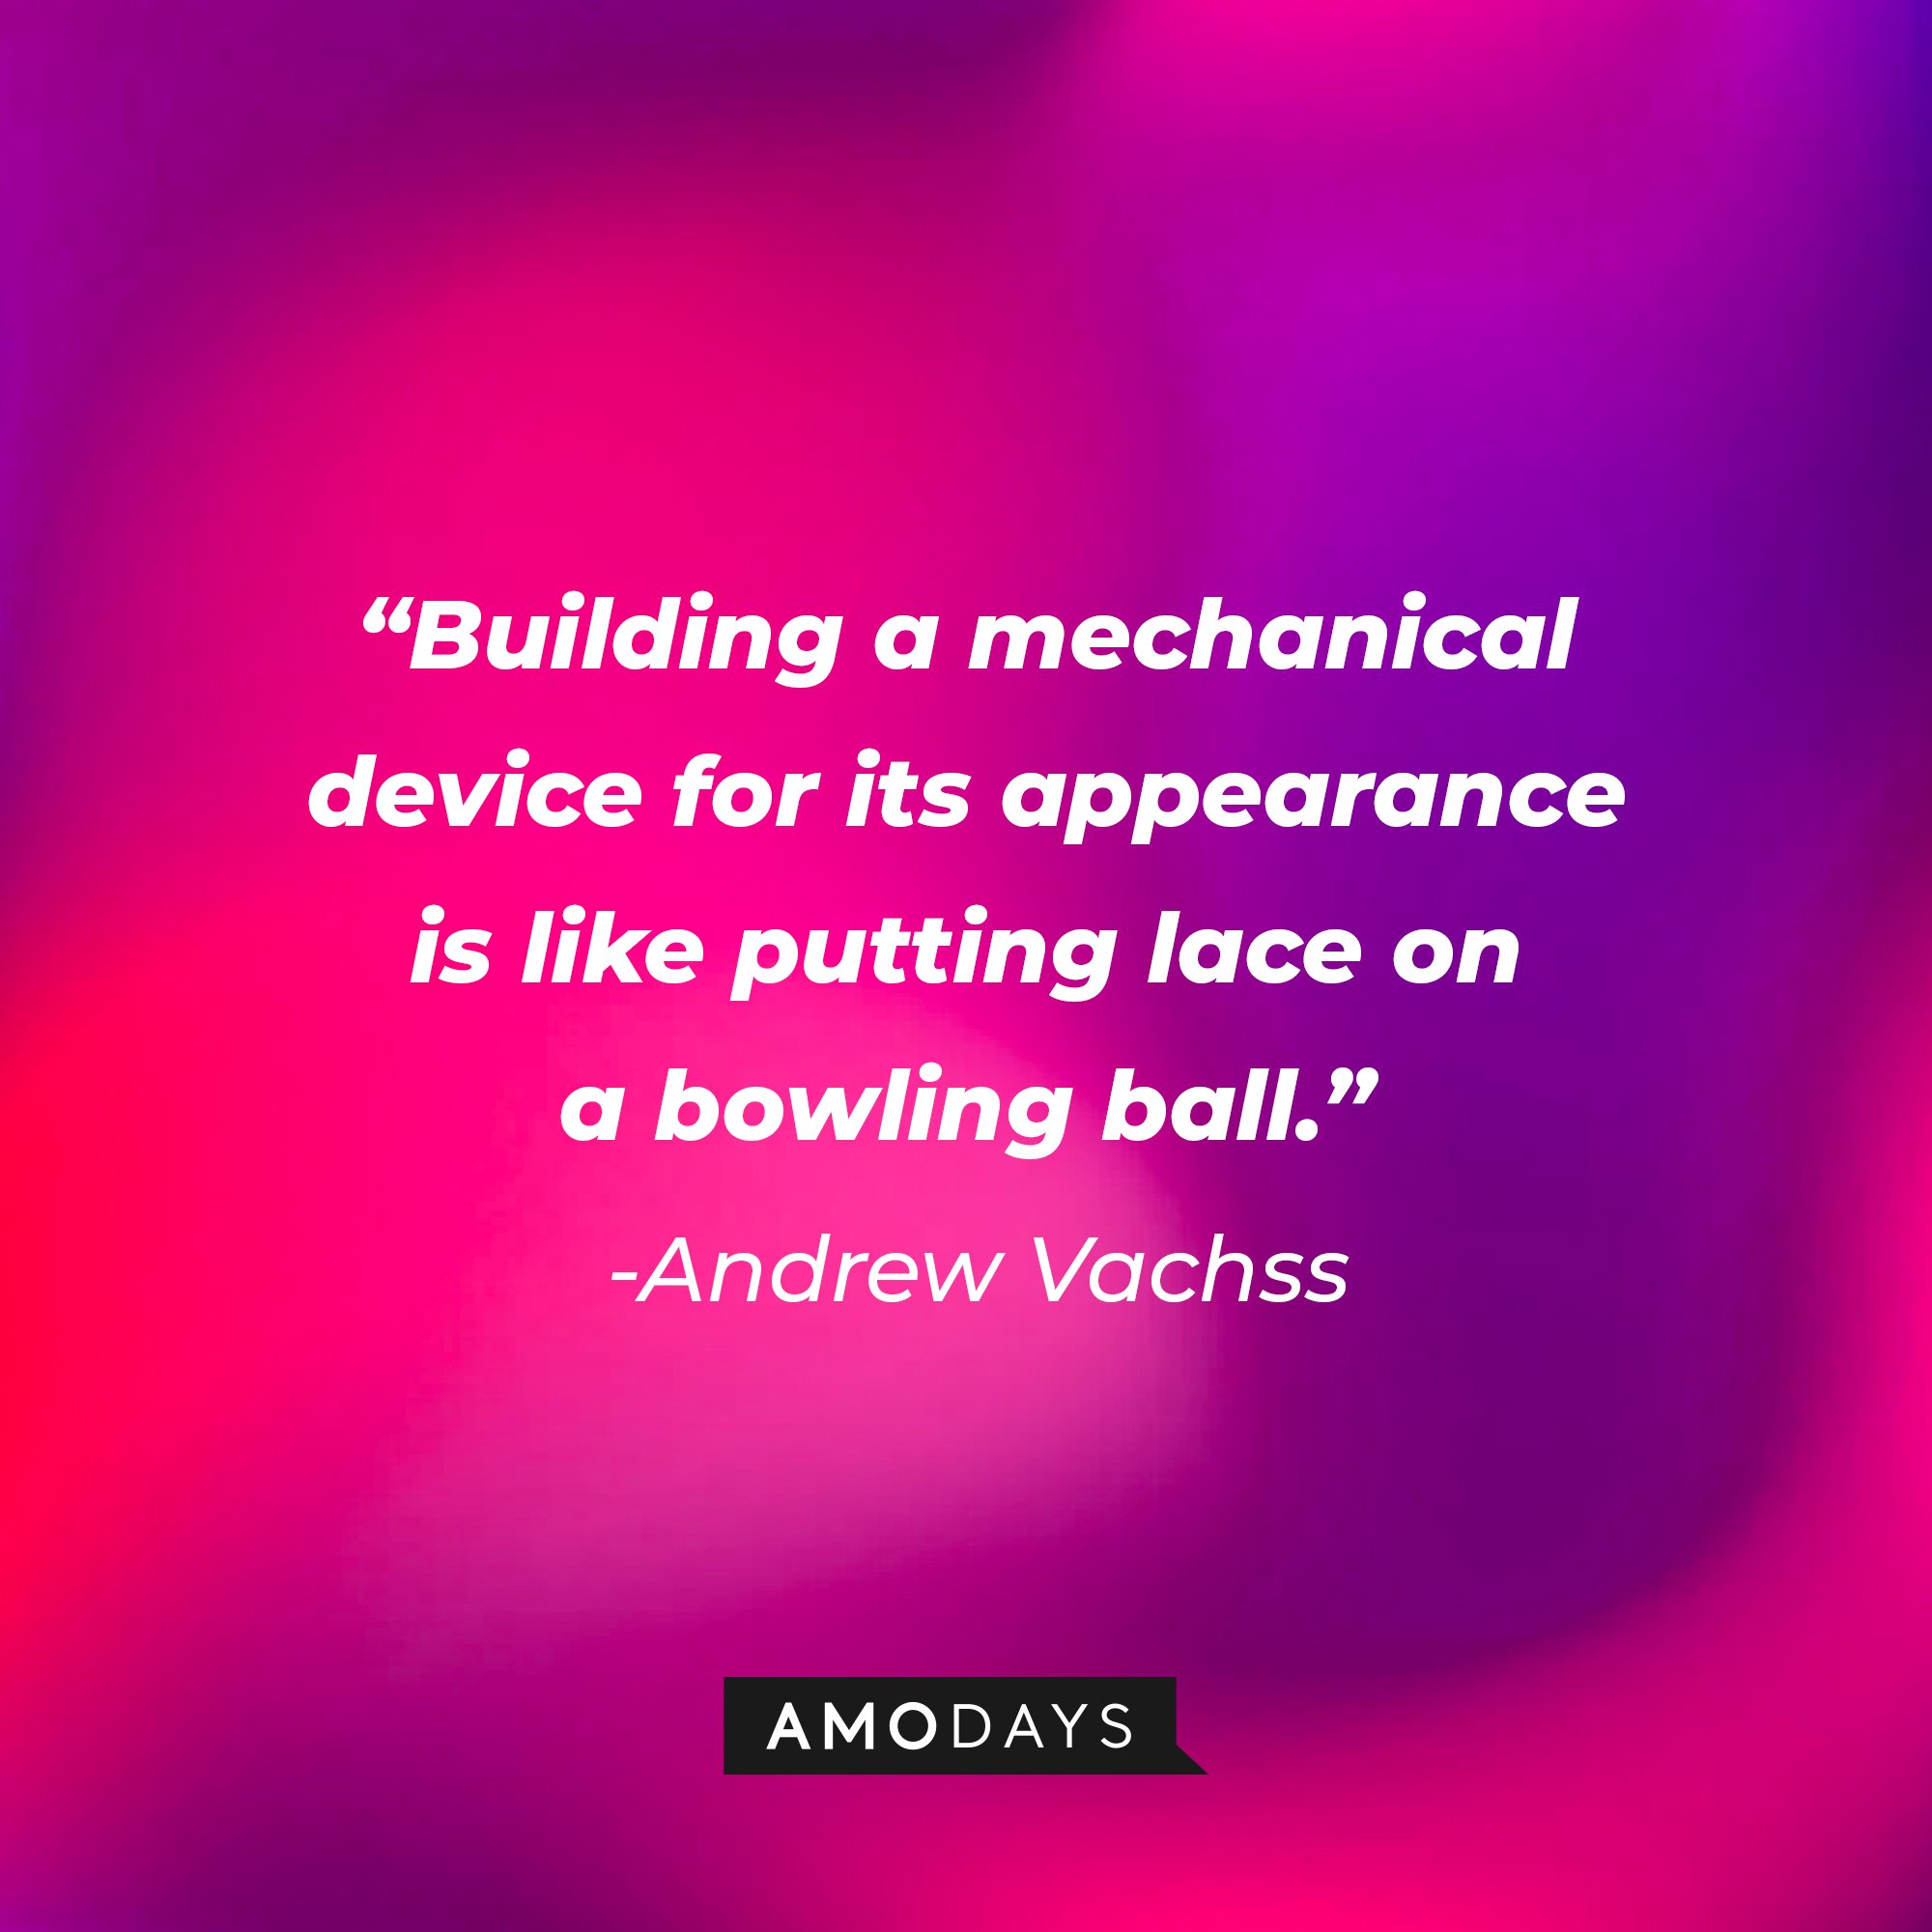 Andrew Vachss' quote: "Building a mechanical device for its appearance is like putting lace on a bowling ball." | Image: AmoDays